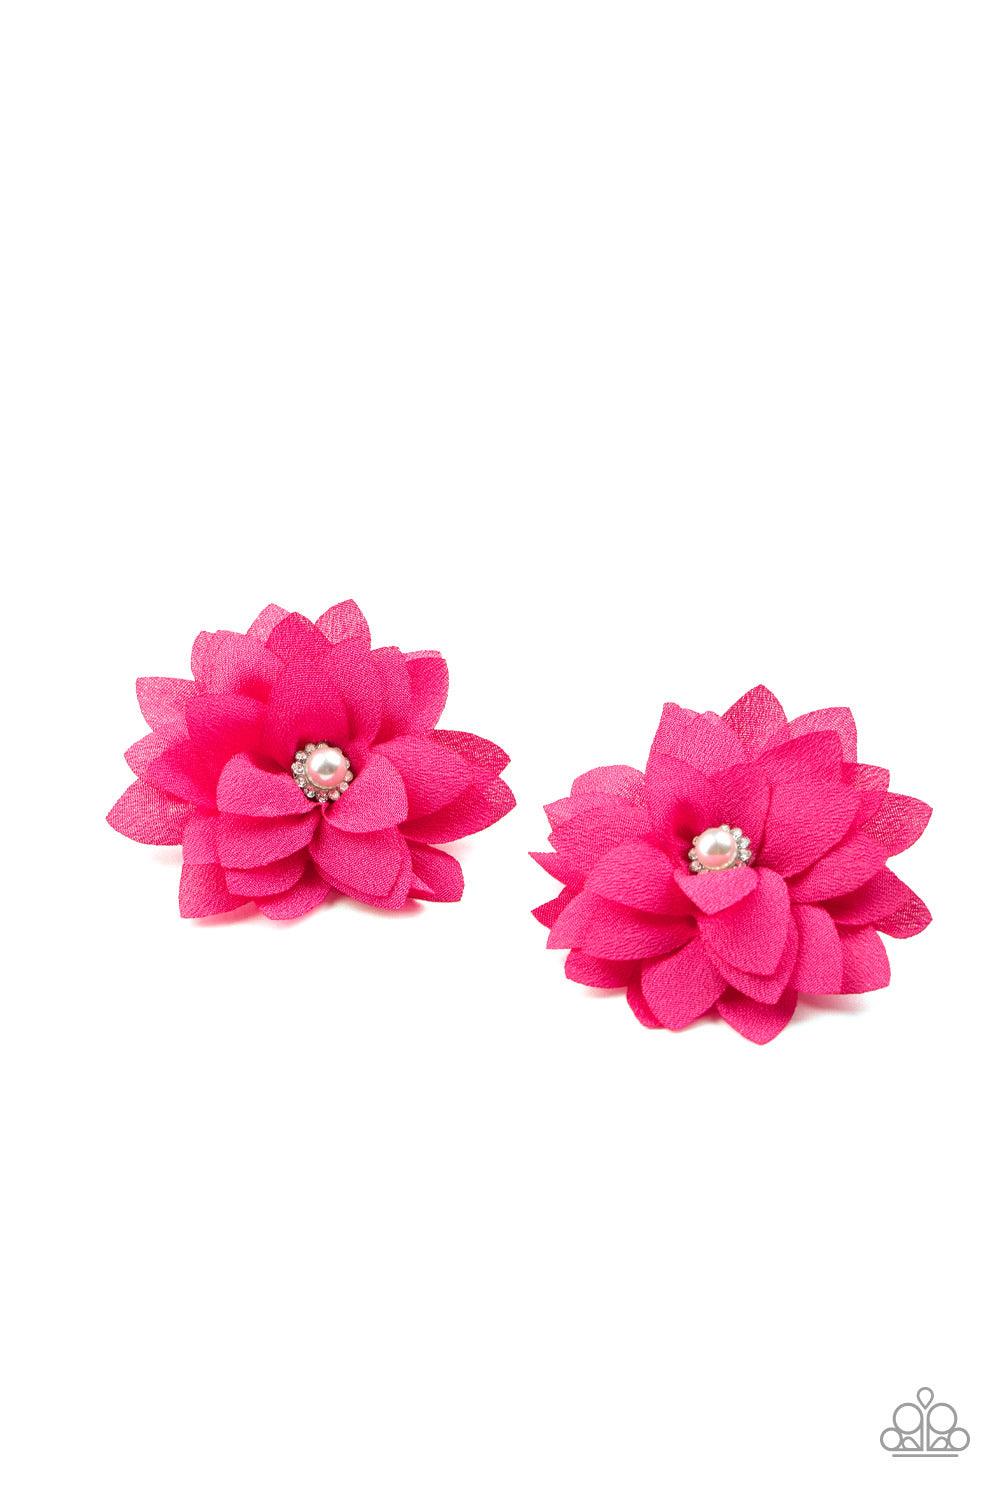 Paparazzi Accessories Things That Go BLOOM! - Pink Dotted with dainty white pearl and white rhinestone encrusted centerpieces, pink chiffon petals delicately bloom into a pair of elegant blossoms. Features standard hair clips. Sold as one pair of hair cli